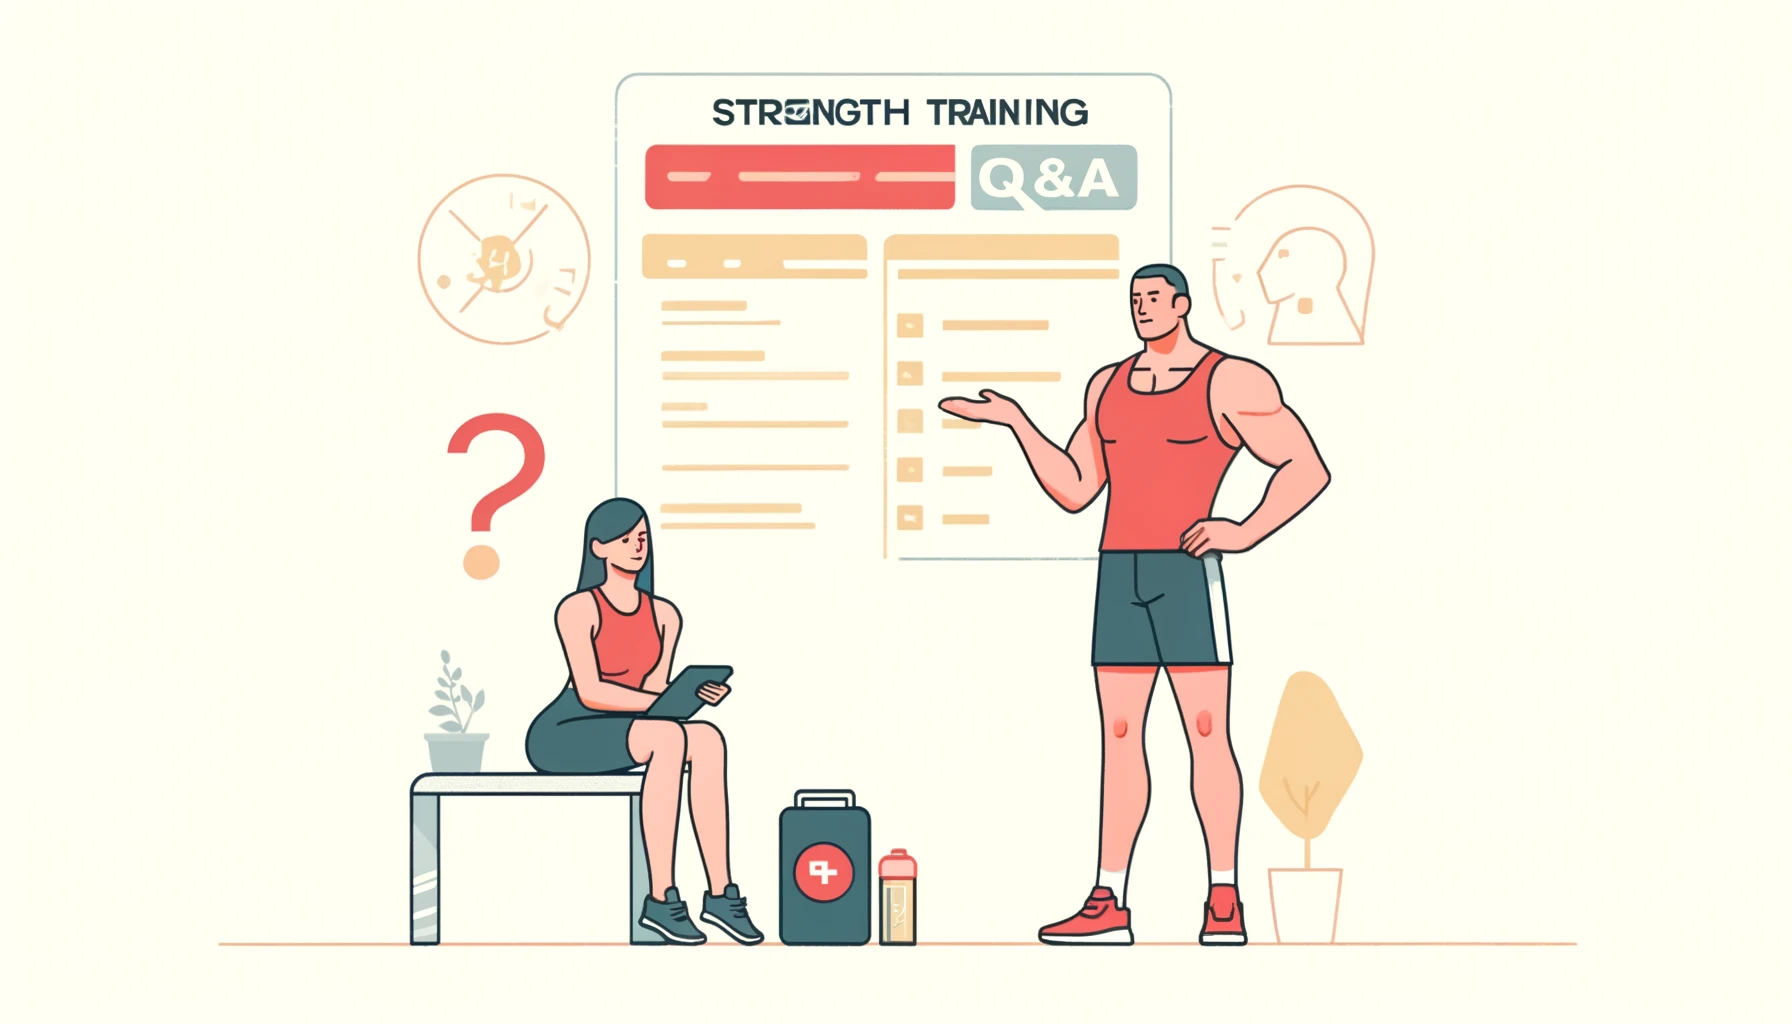 A simple, wide illustration for a blog header, depicting the theme 'Strength Training Q&A'. The image should feature two characters of ambiguous gender: one appears as a beginner asking questions, and the other as a fitness trainer answering. They should be in a gym setting, with the beginner holding a notebook or digital device for notes, and the trainer gesturing as if explaining. The illustration should be minimalistic with clear, engaging colors that highlight the interactive and informative nature of the scene.